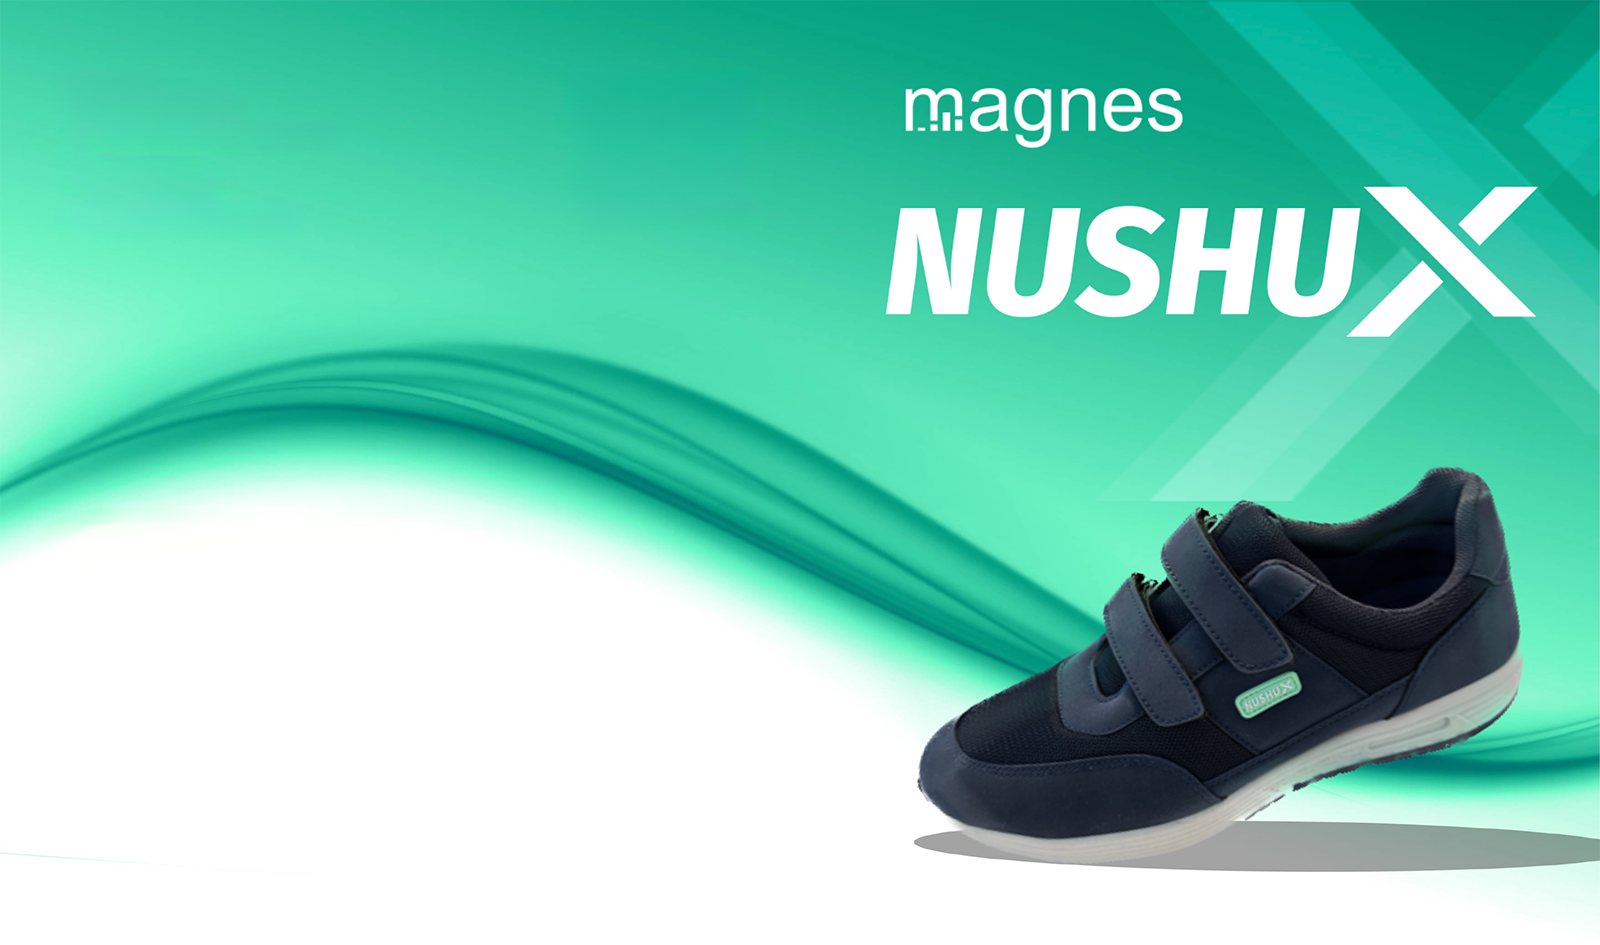 Nushu X, the smart shoe helping those with Parkinson's disease to walk with confidence